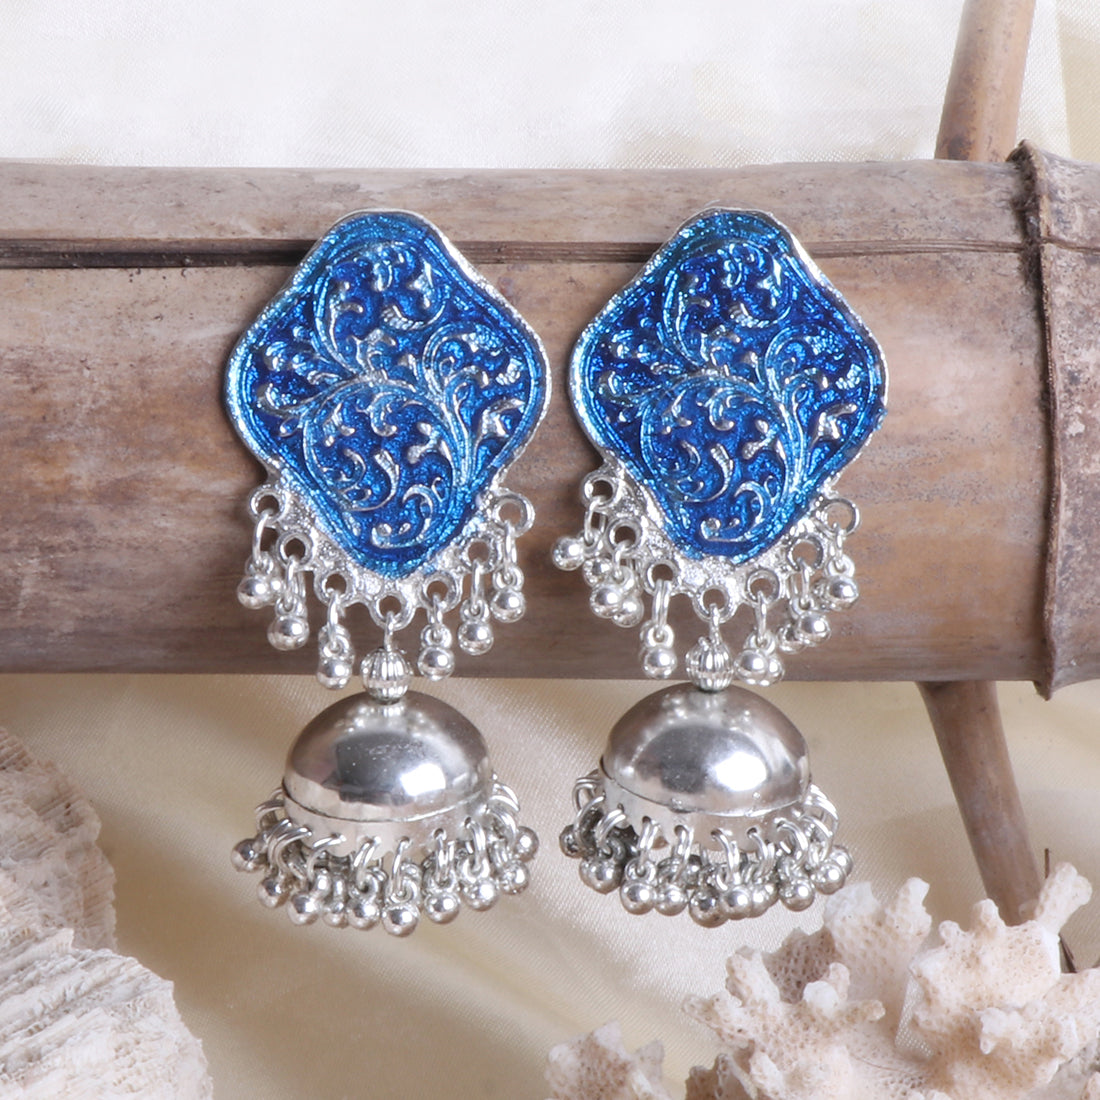 OVERSIZED HANDCRAFTED ETHNIC SILVER-TONED BLUE ACRYLIC GHUNGROO JHUMKI DROP EARRINGS